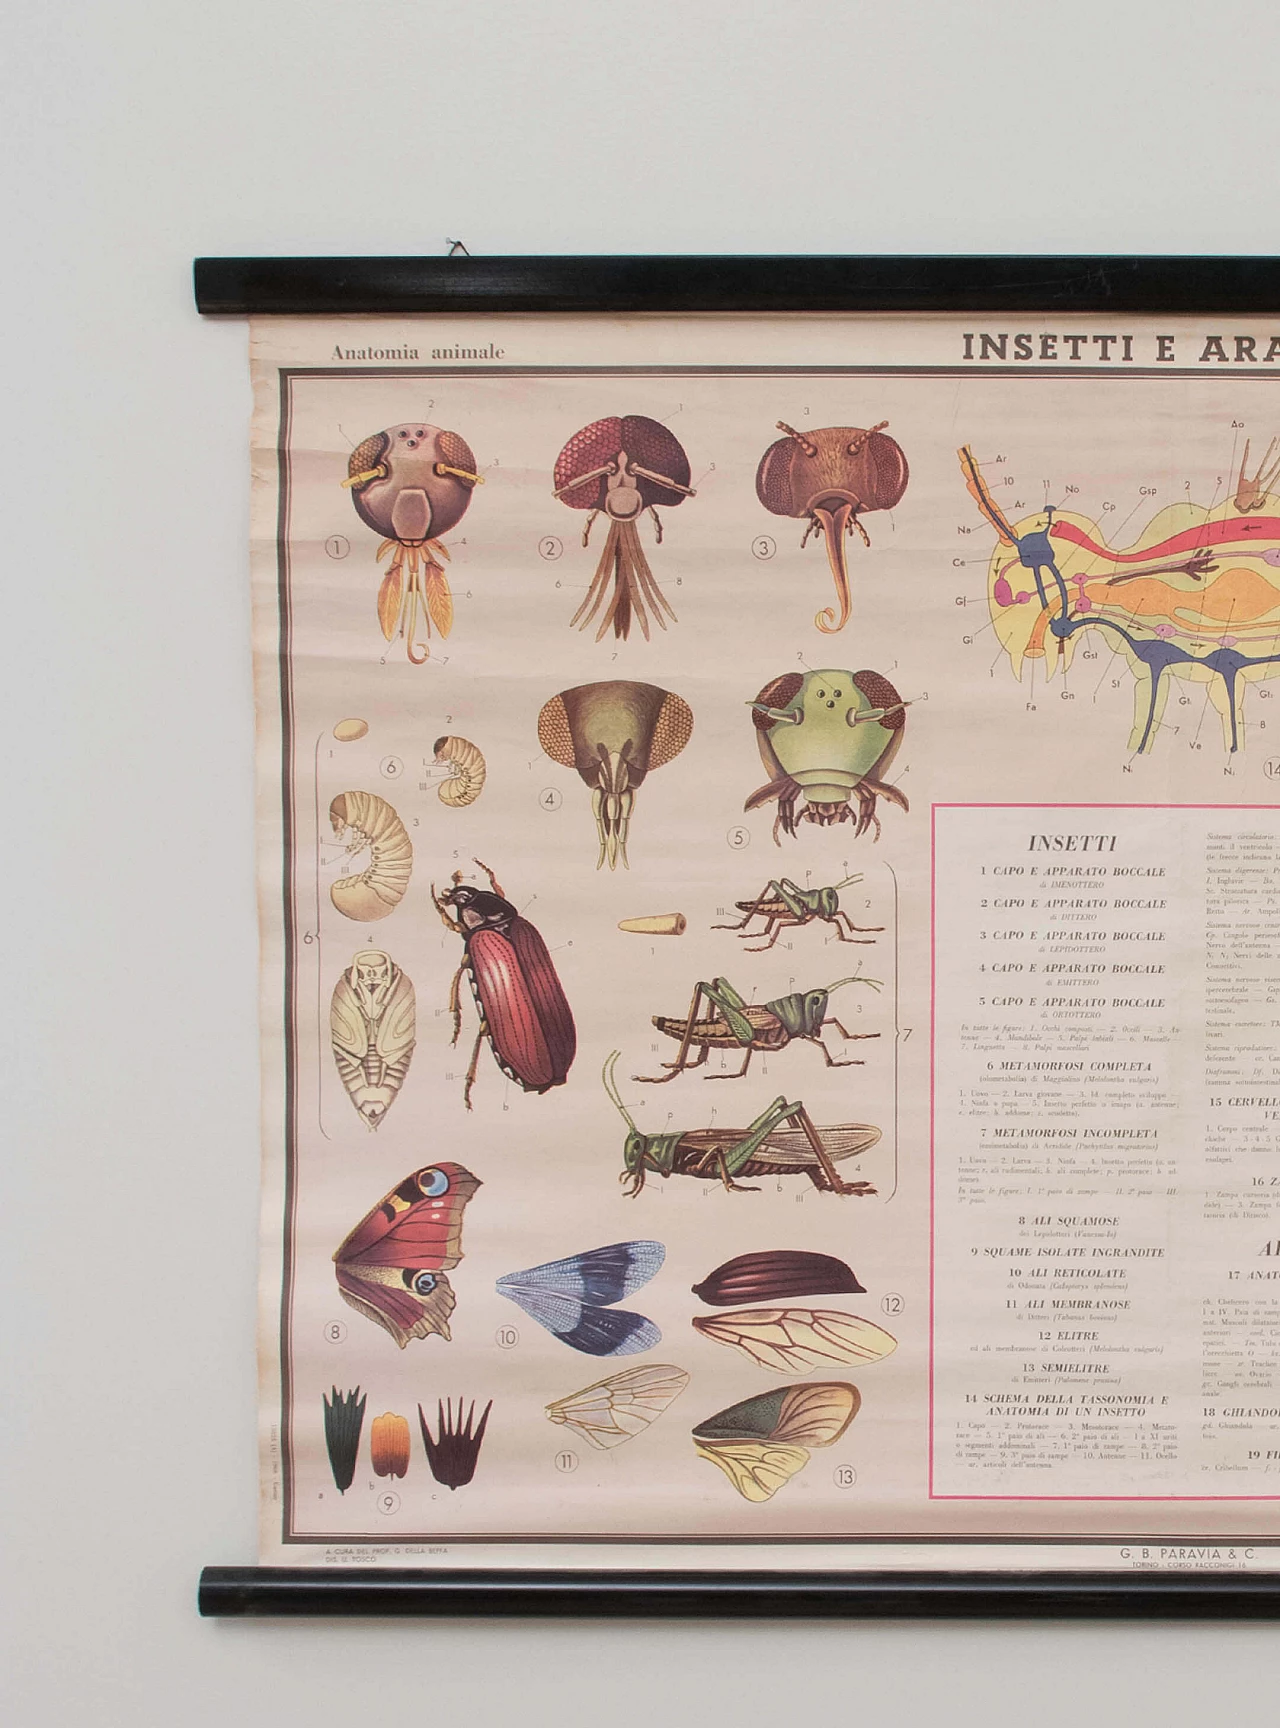 Educational print on insects, Paravia, 1968 1088776